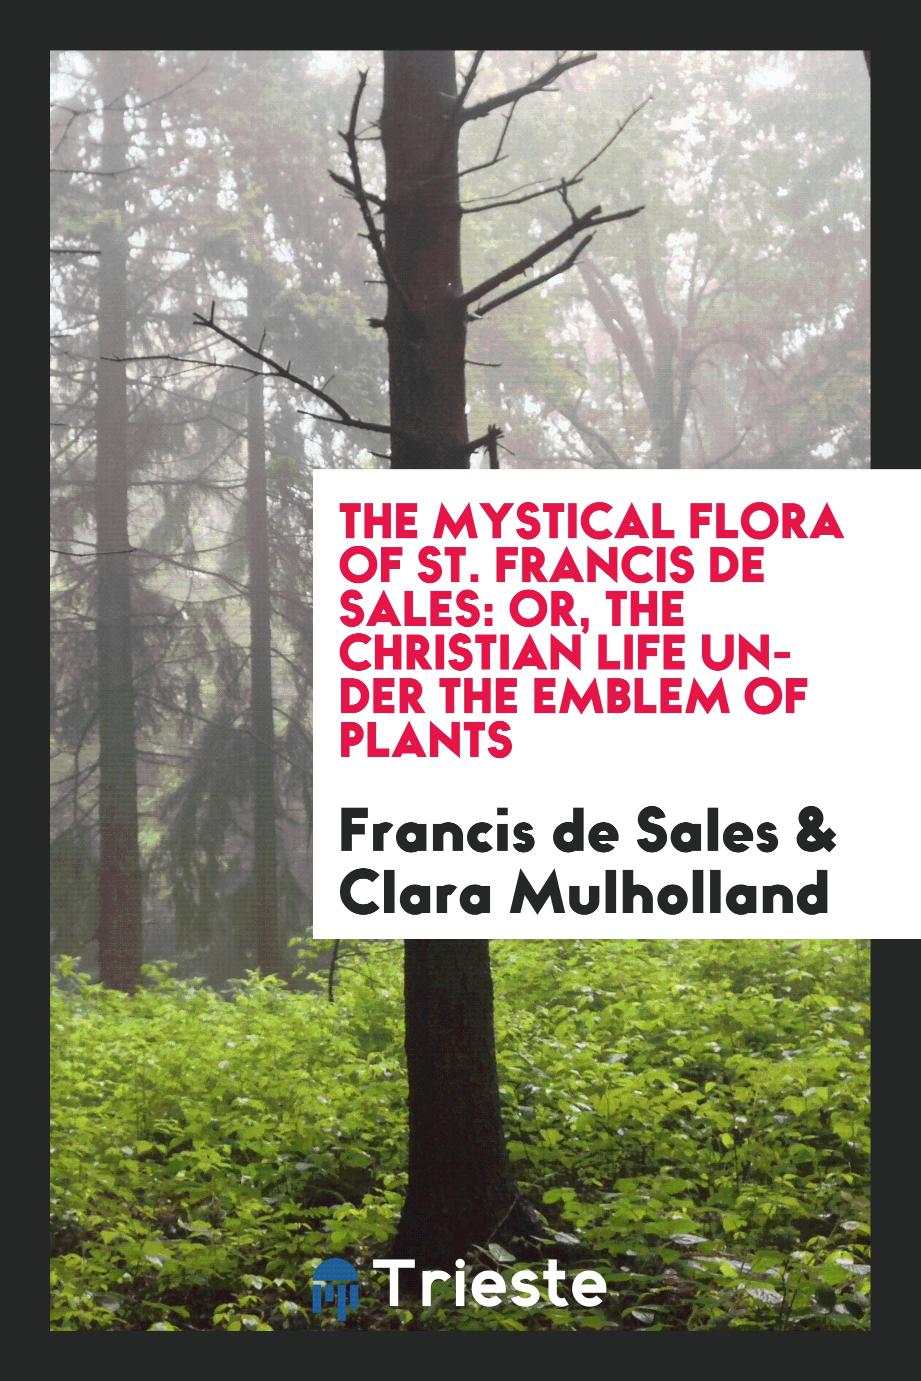 The mystical flora of St. Francis de Sales: or, The Christian life under the emblem of plants